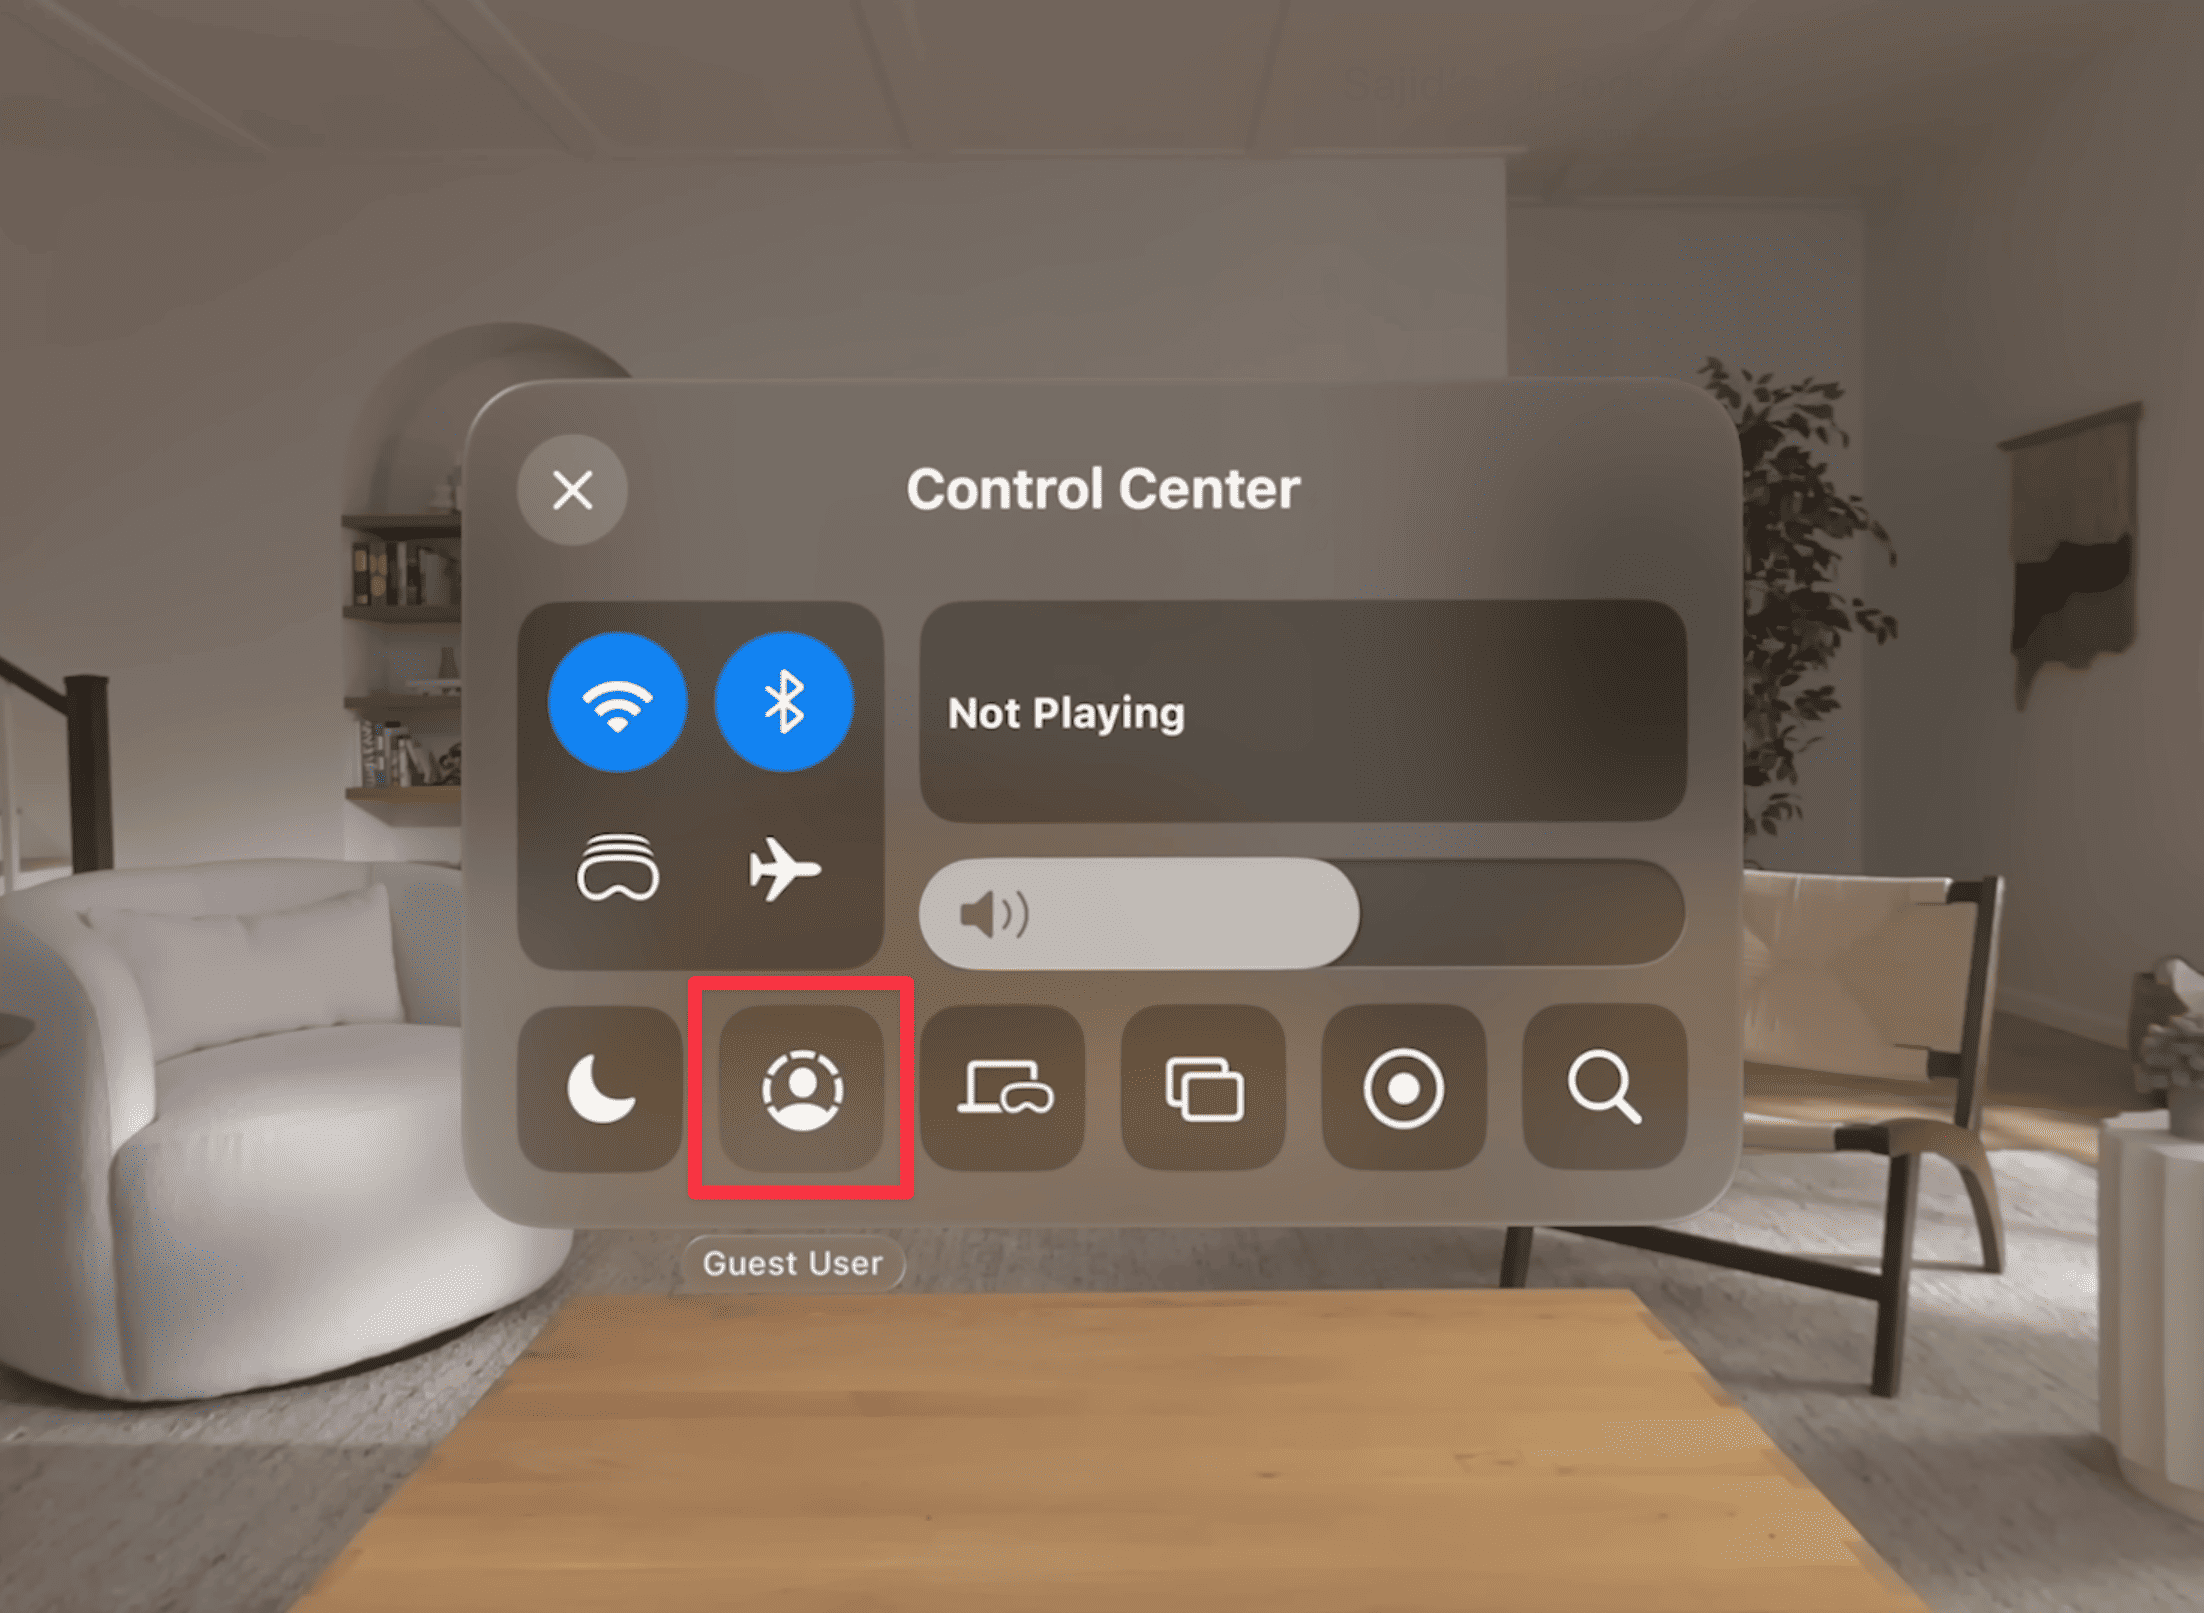 Select Guest User from the Control Center